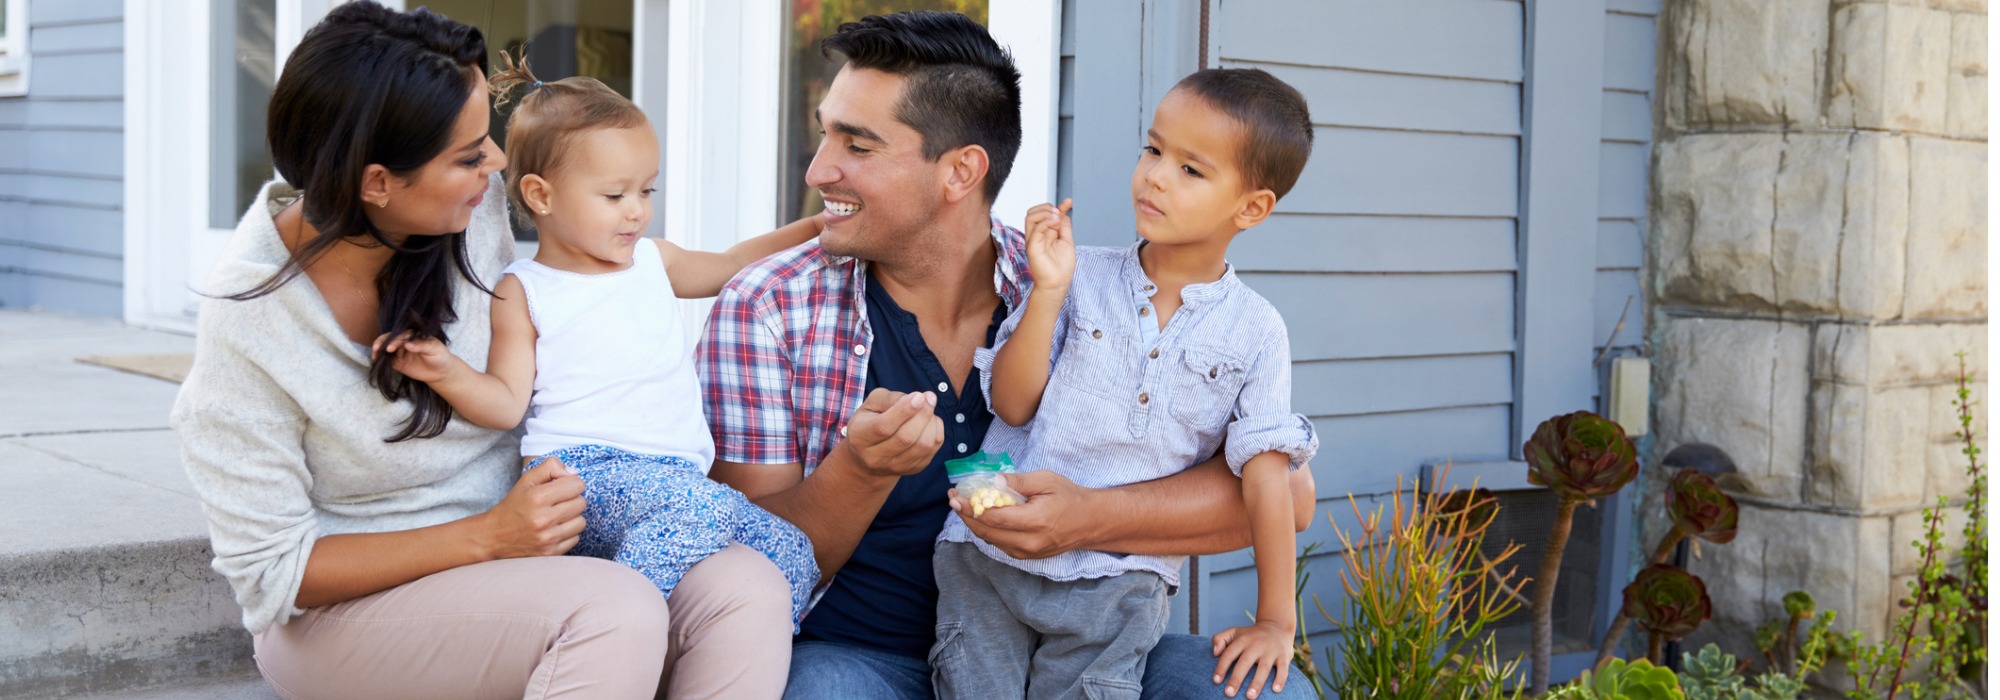 A young and diverse family in California, sitting on the porch steps with two young children outside an ADU